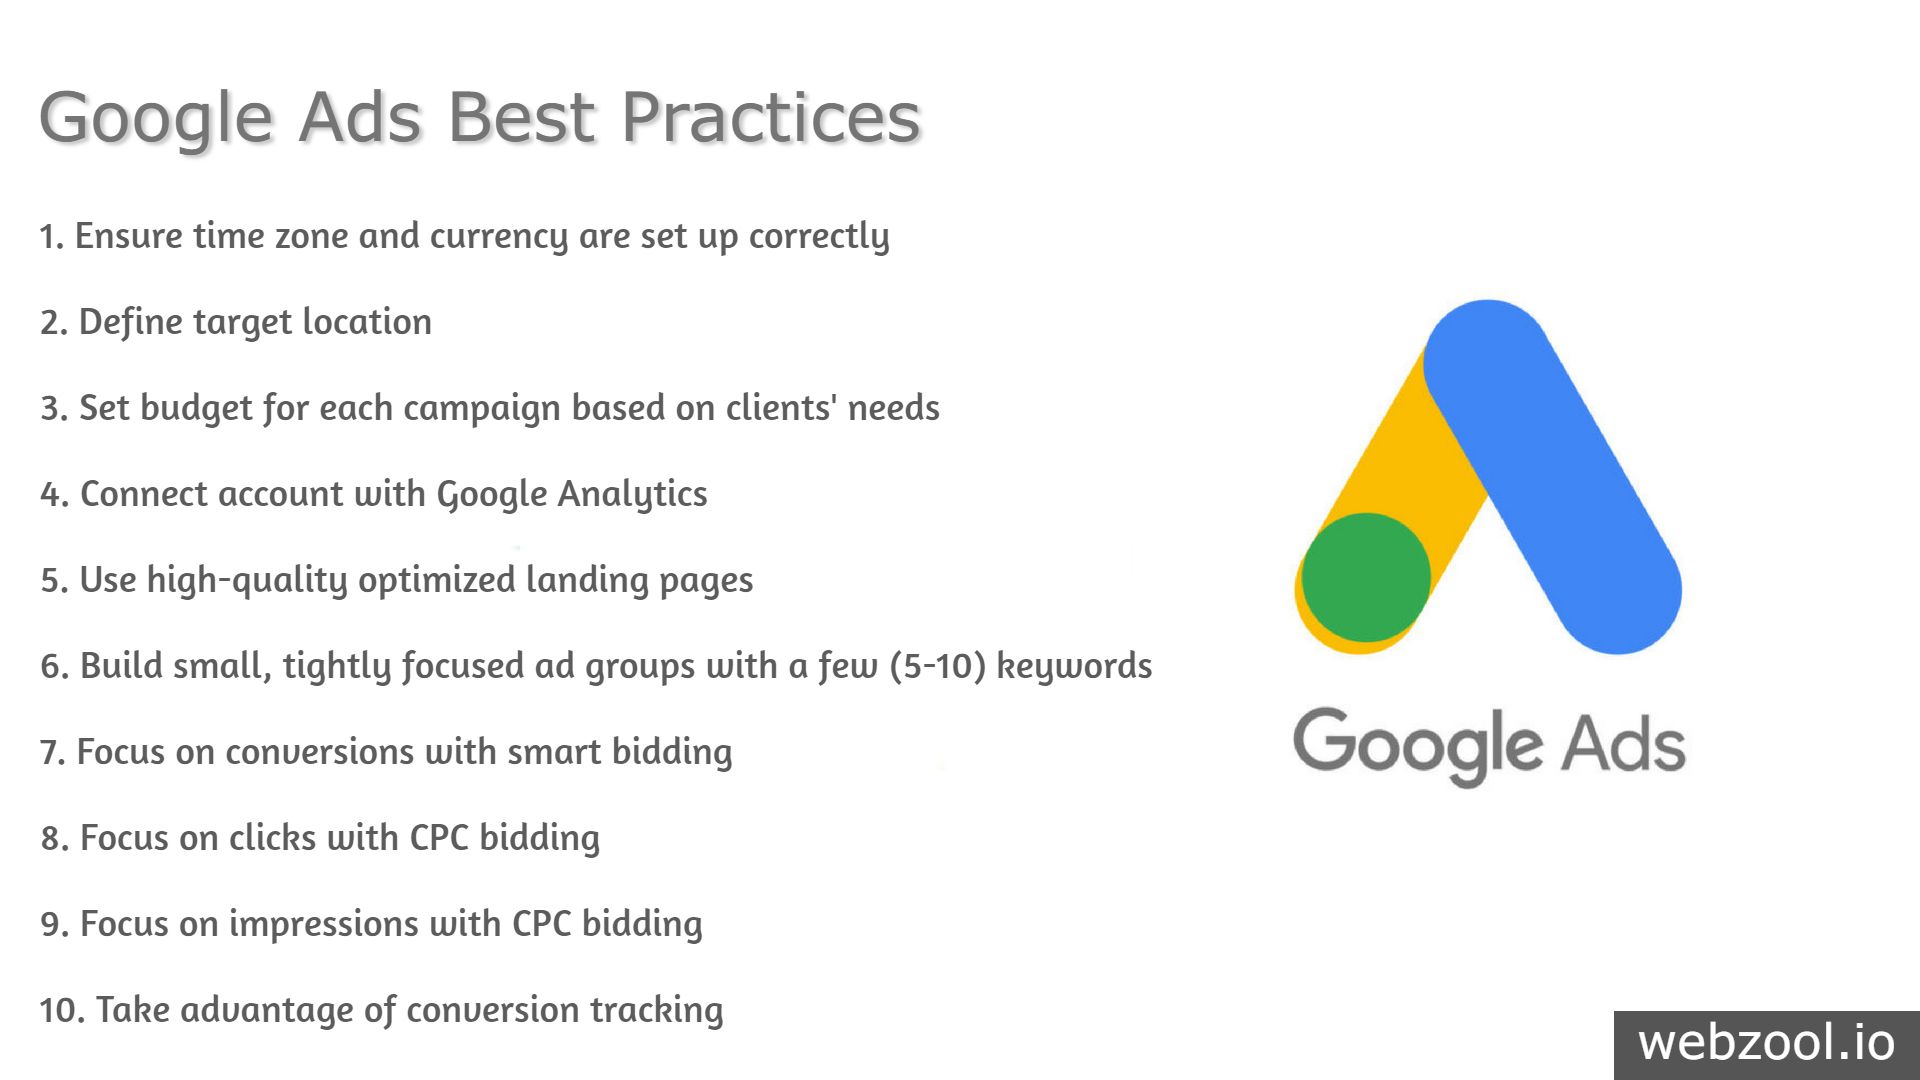 Best Practices for Google Ads